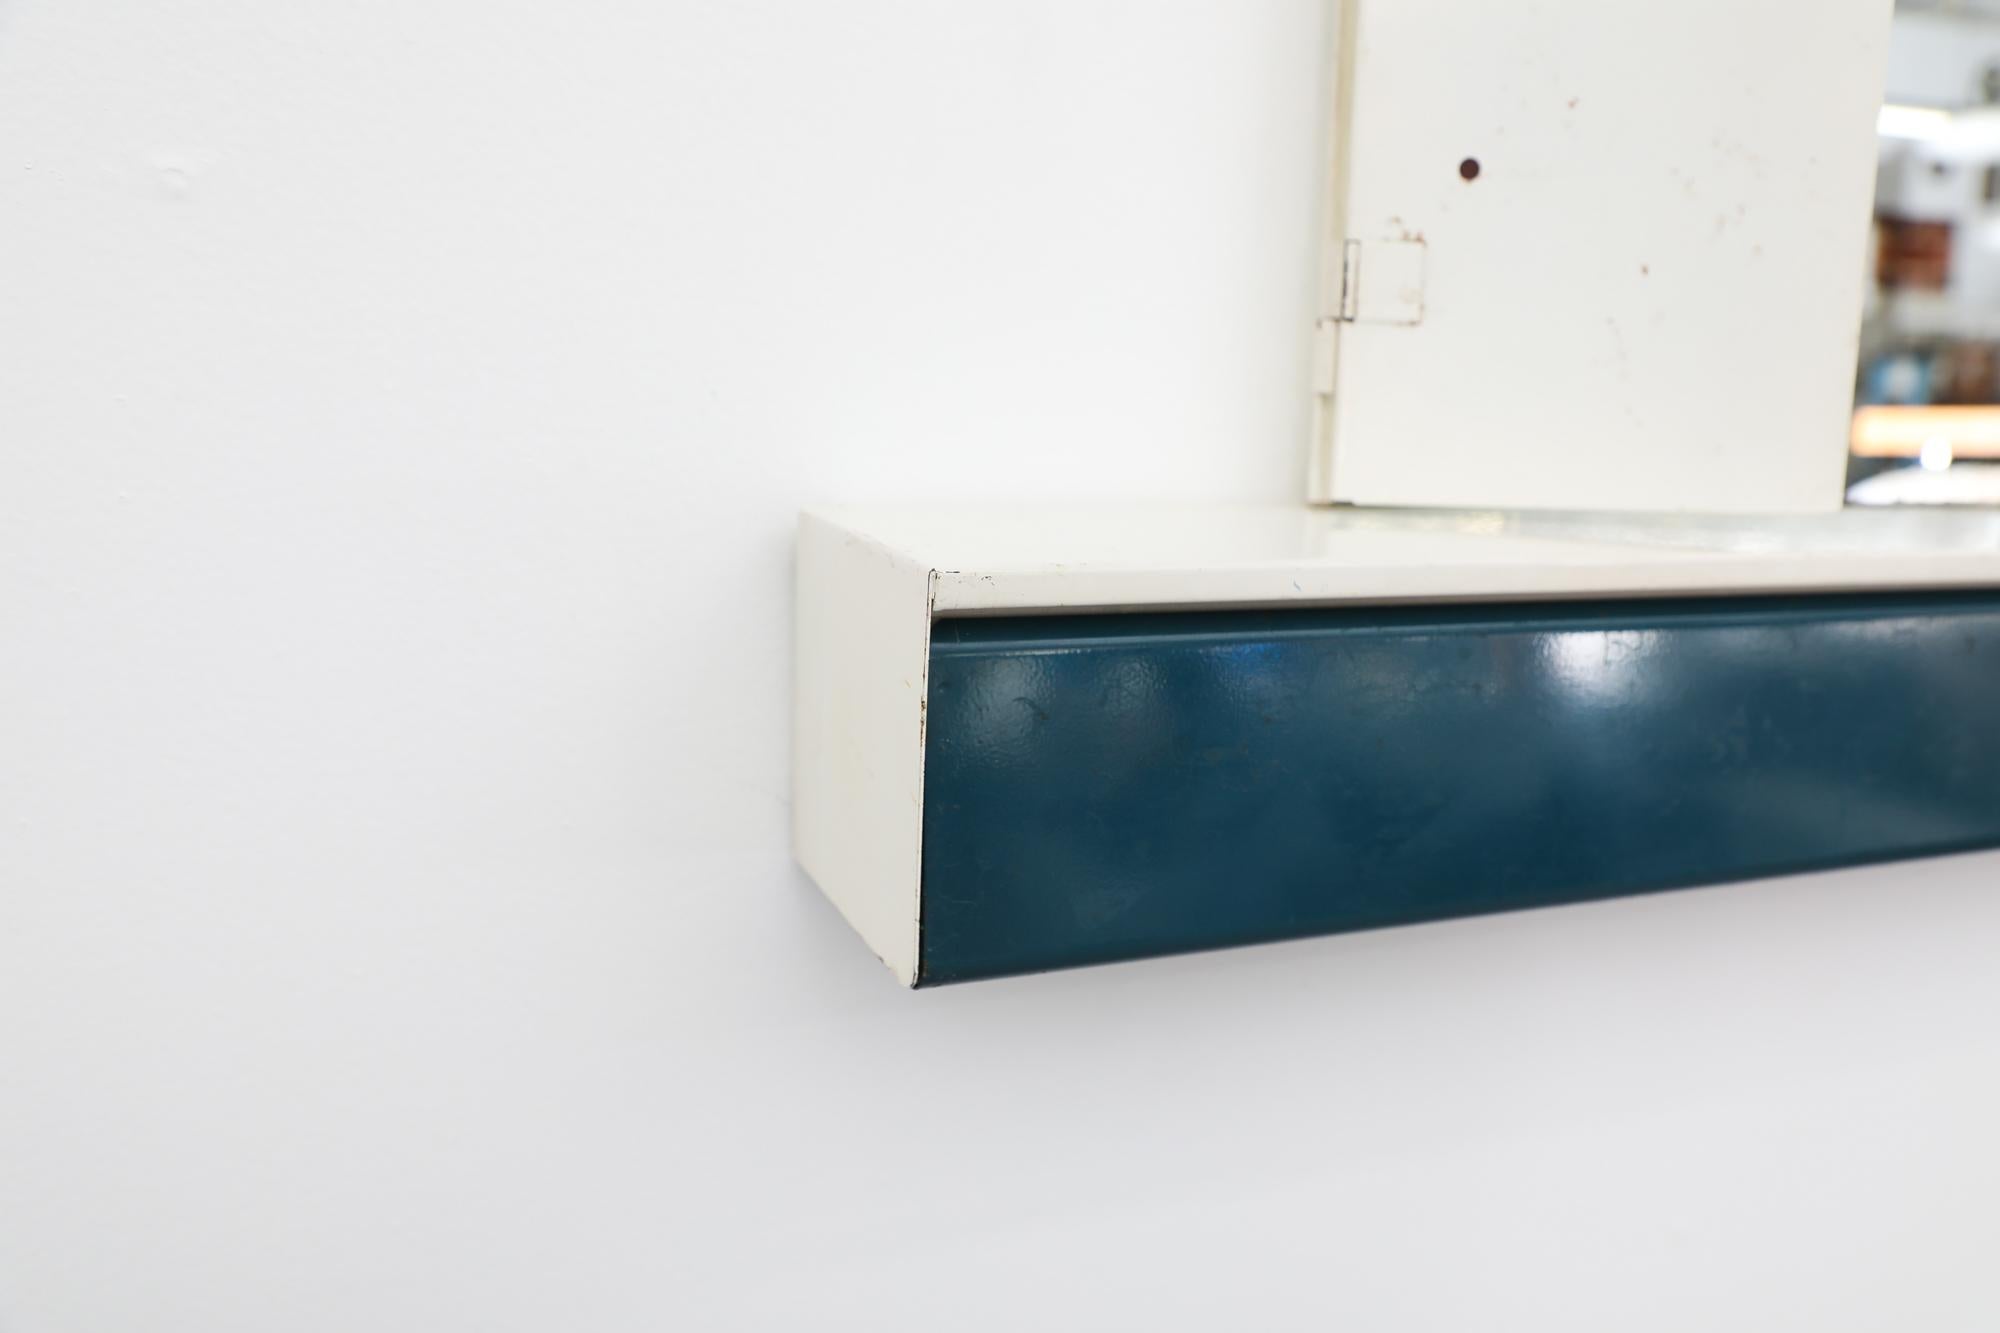 Brabantia Trifold Mirror with Blue Shelf, 1960's For Sale 7